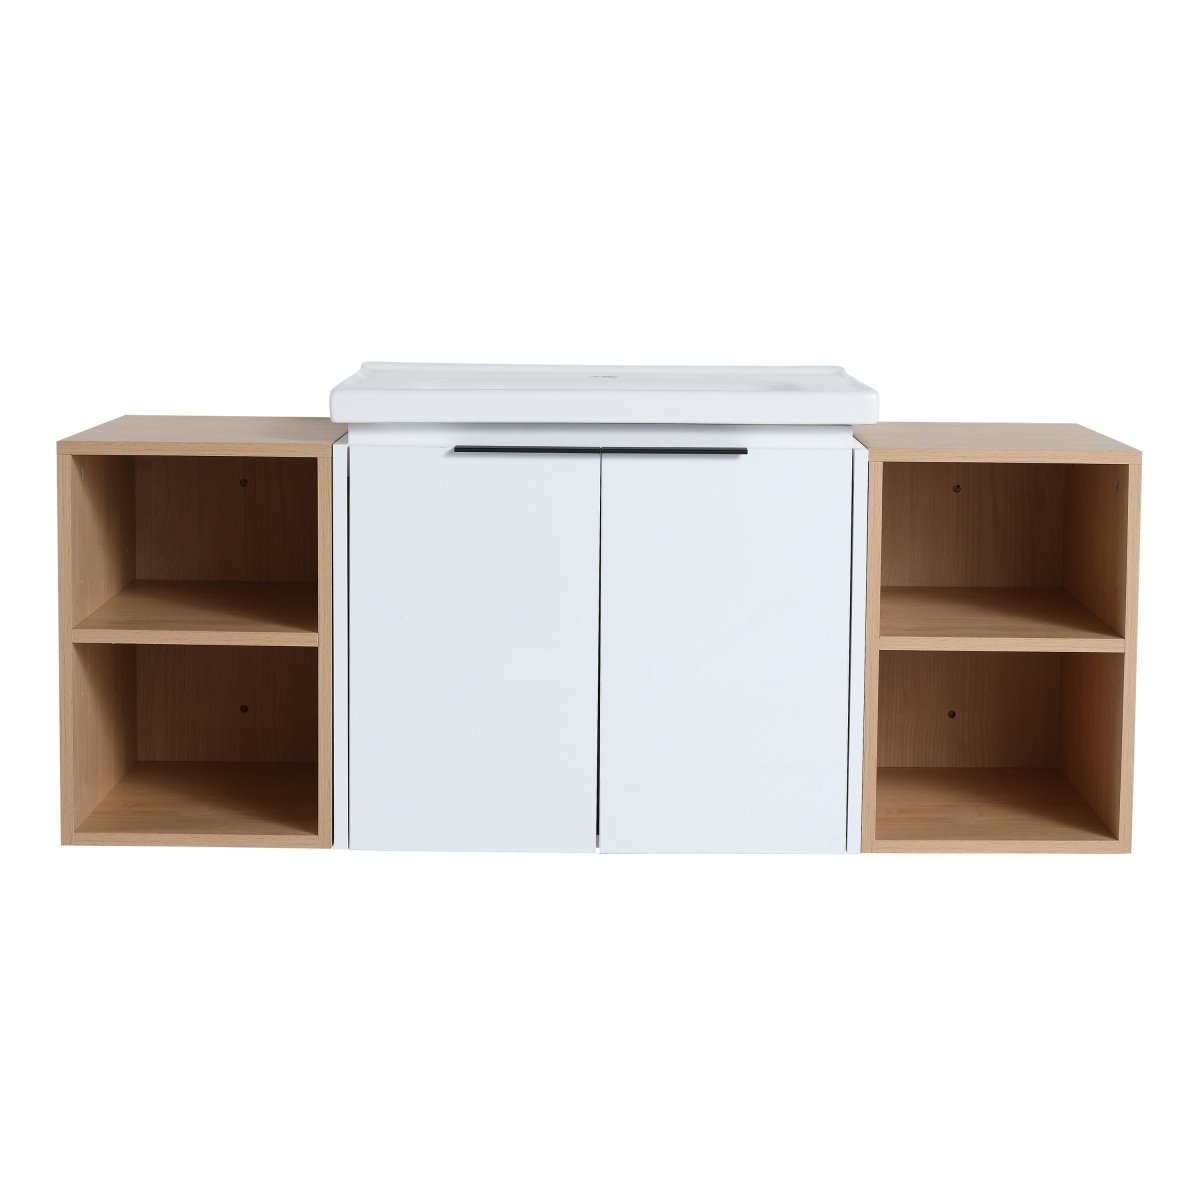 Exbrite 48 Inch Soft Close Doors Bathroom Vanity With Sink, and Two Small Storage Shelves